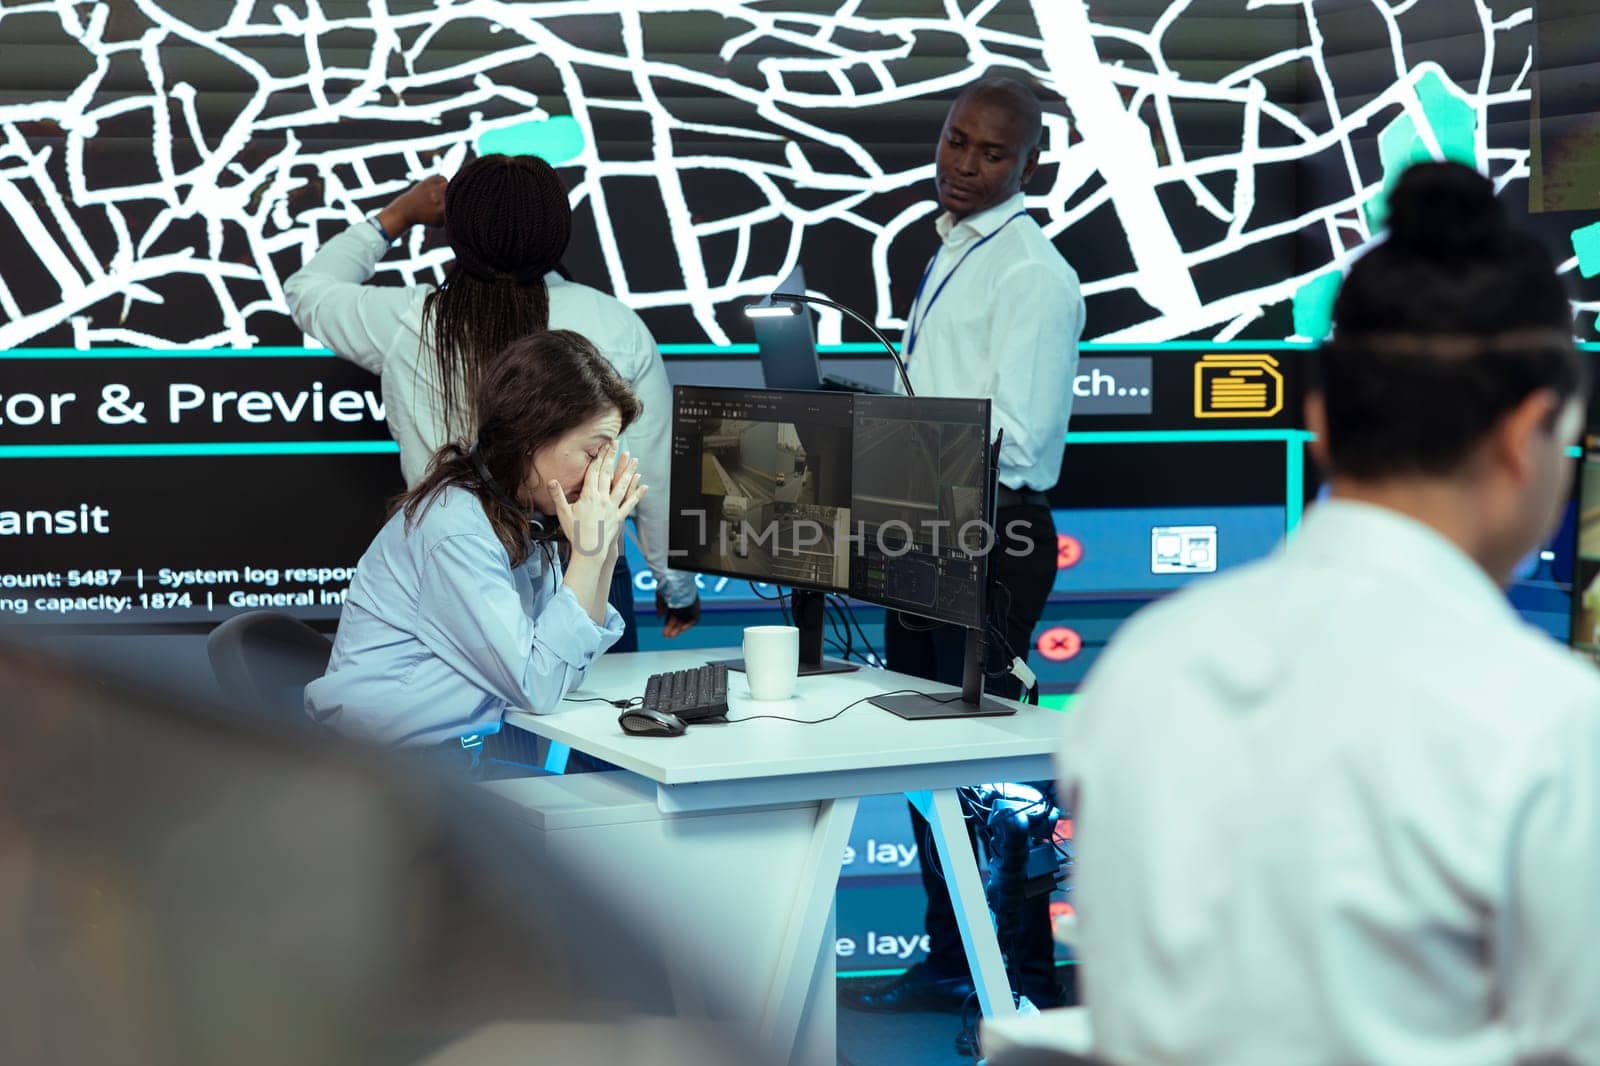 Sleepy frustrated woman monitoring and locating couriers in traffic by DCStudio